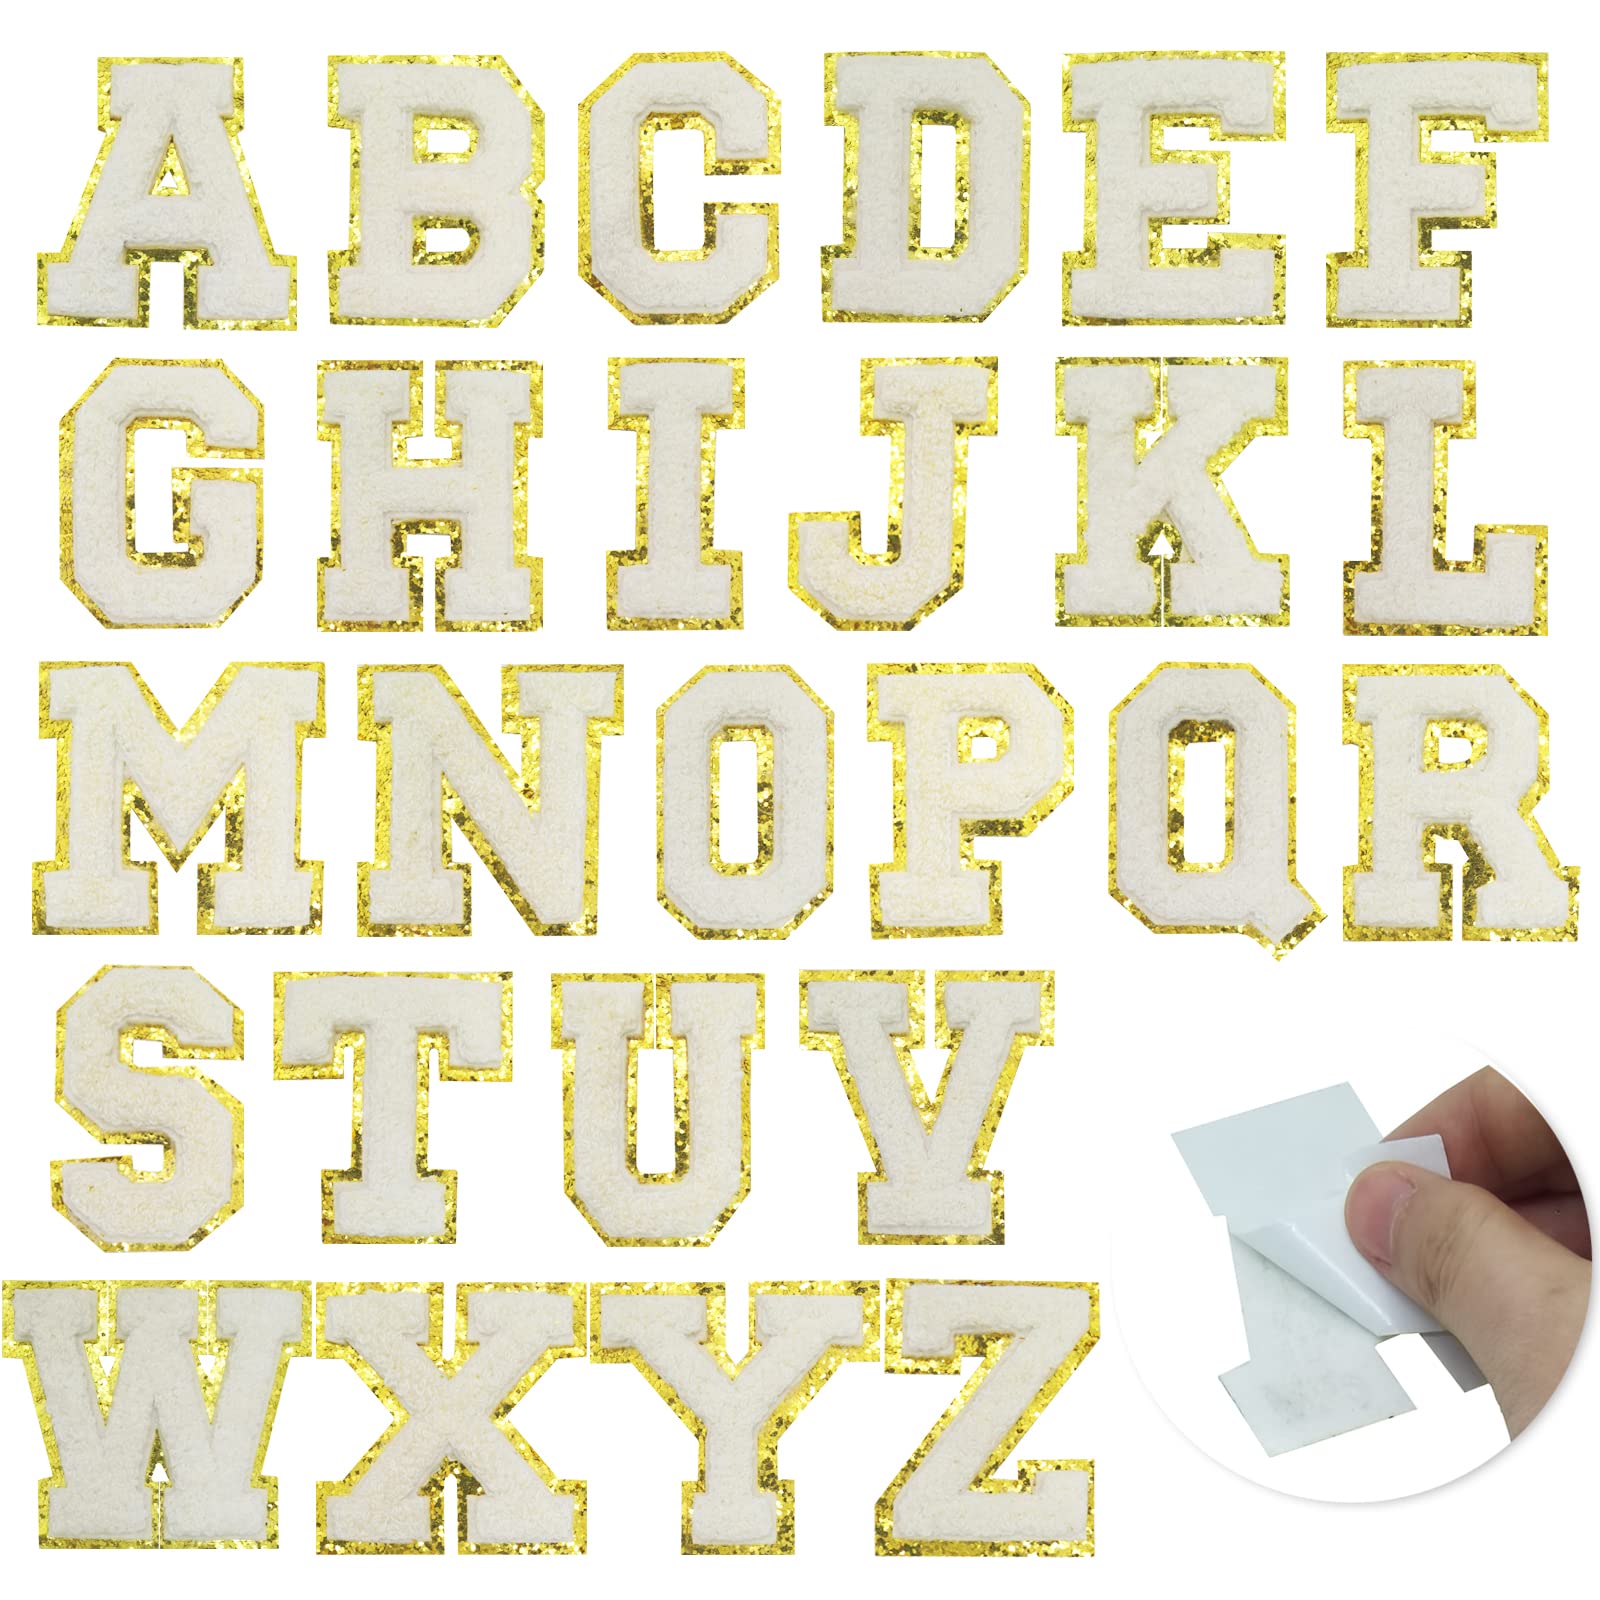 TrendyChic 26 Pieces Self Adhesive Chenille Letter Patches,Iron On Letters  A-Z Stoney Clover Patches,Varsity Embroidered Gold Glitter Border Alphabet  Patches for Clothing DIY Craft (White, 2.56 Inch)